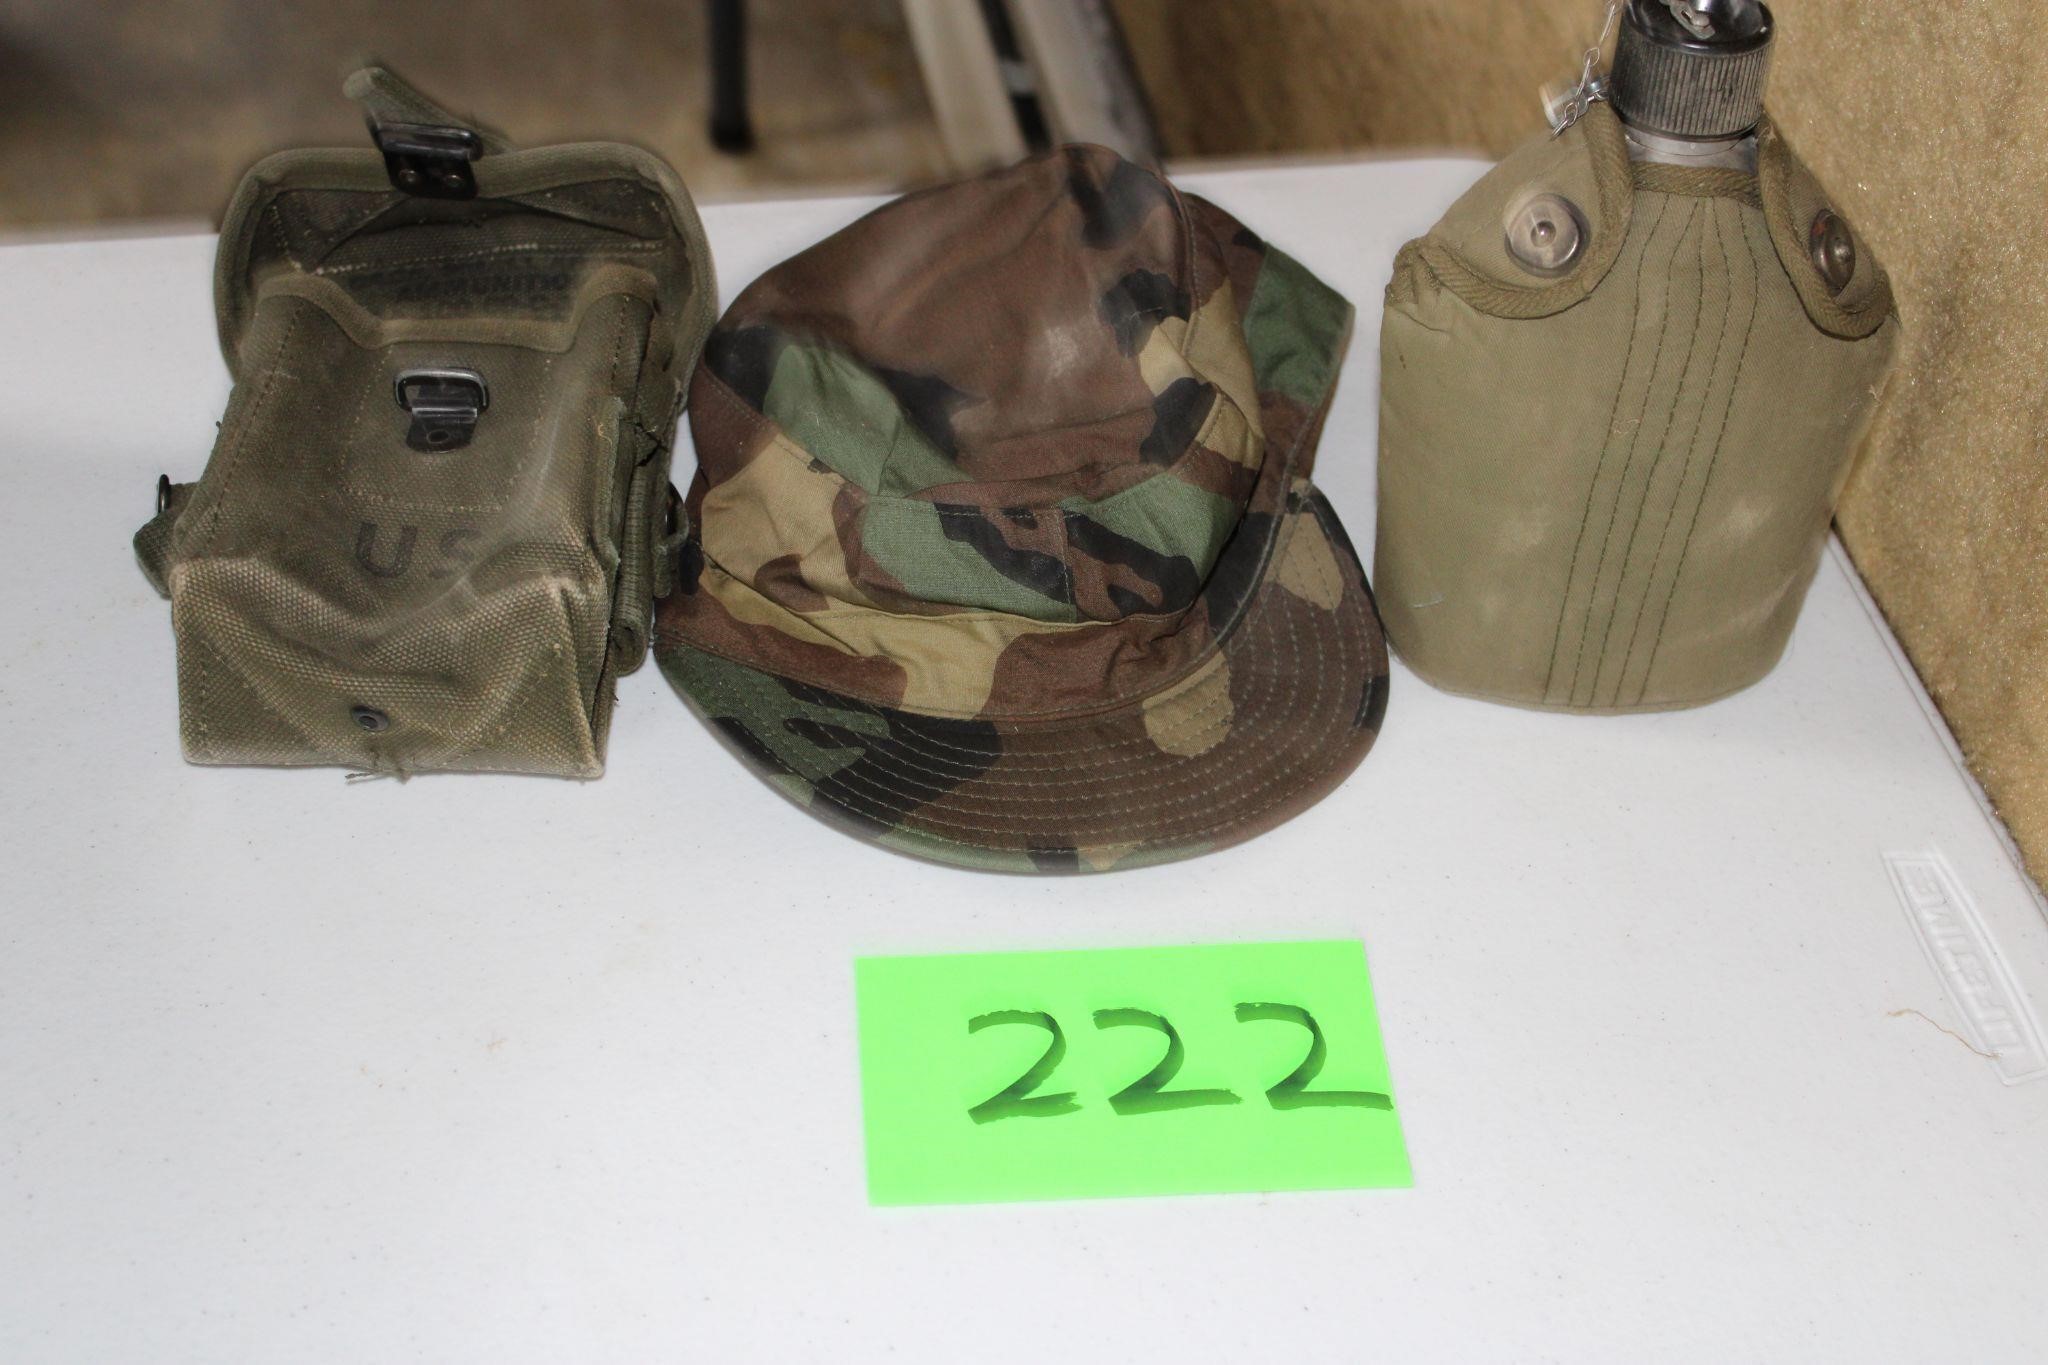 Military items